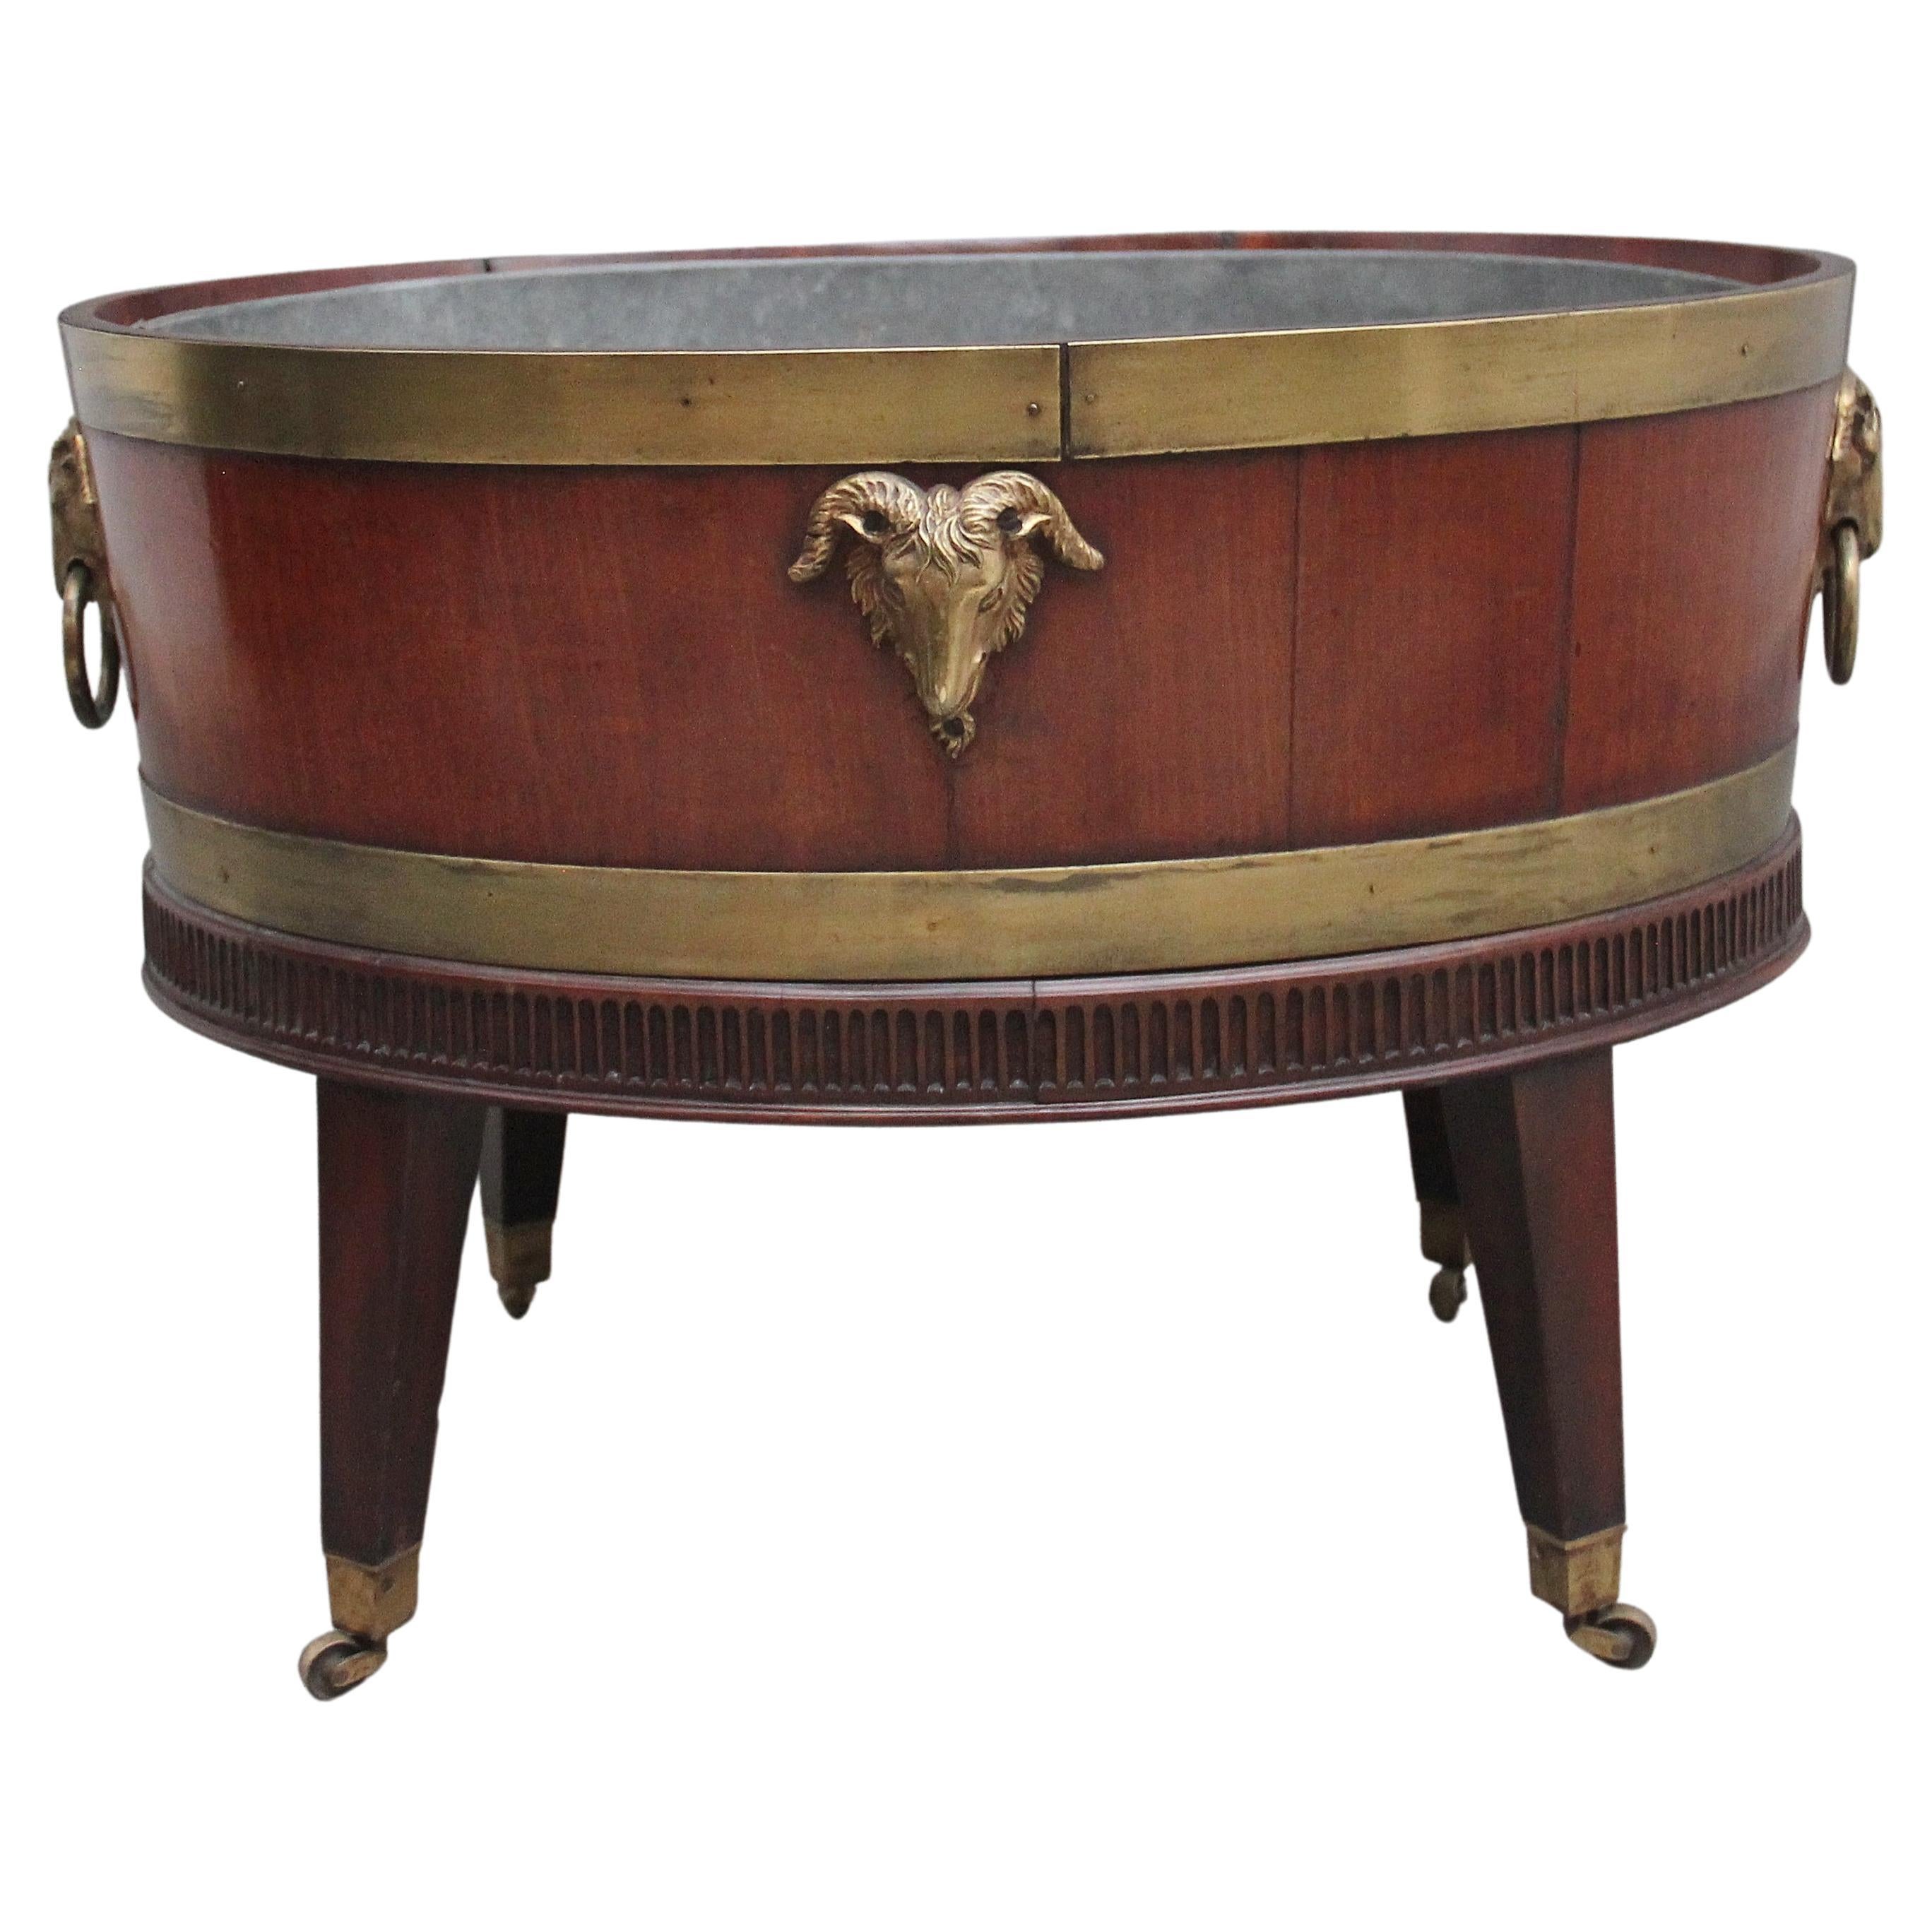 Highly Decorative Early 19th Century Mahogany and Brass Bound Wine Cooler